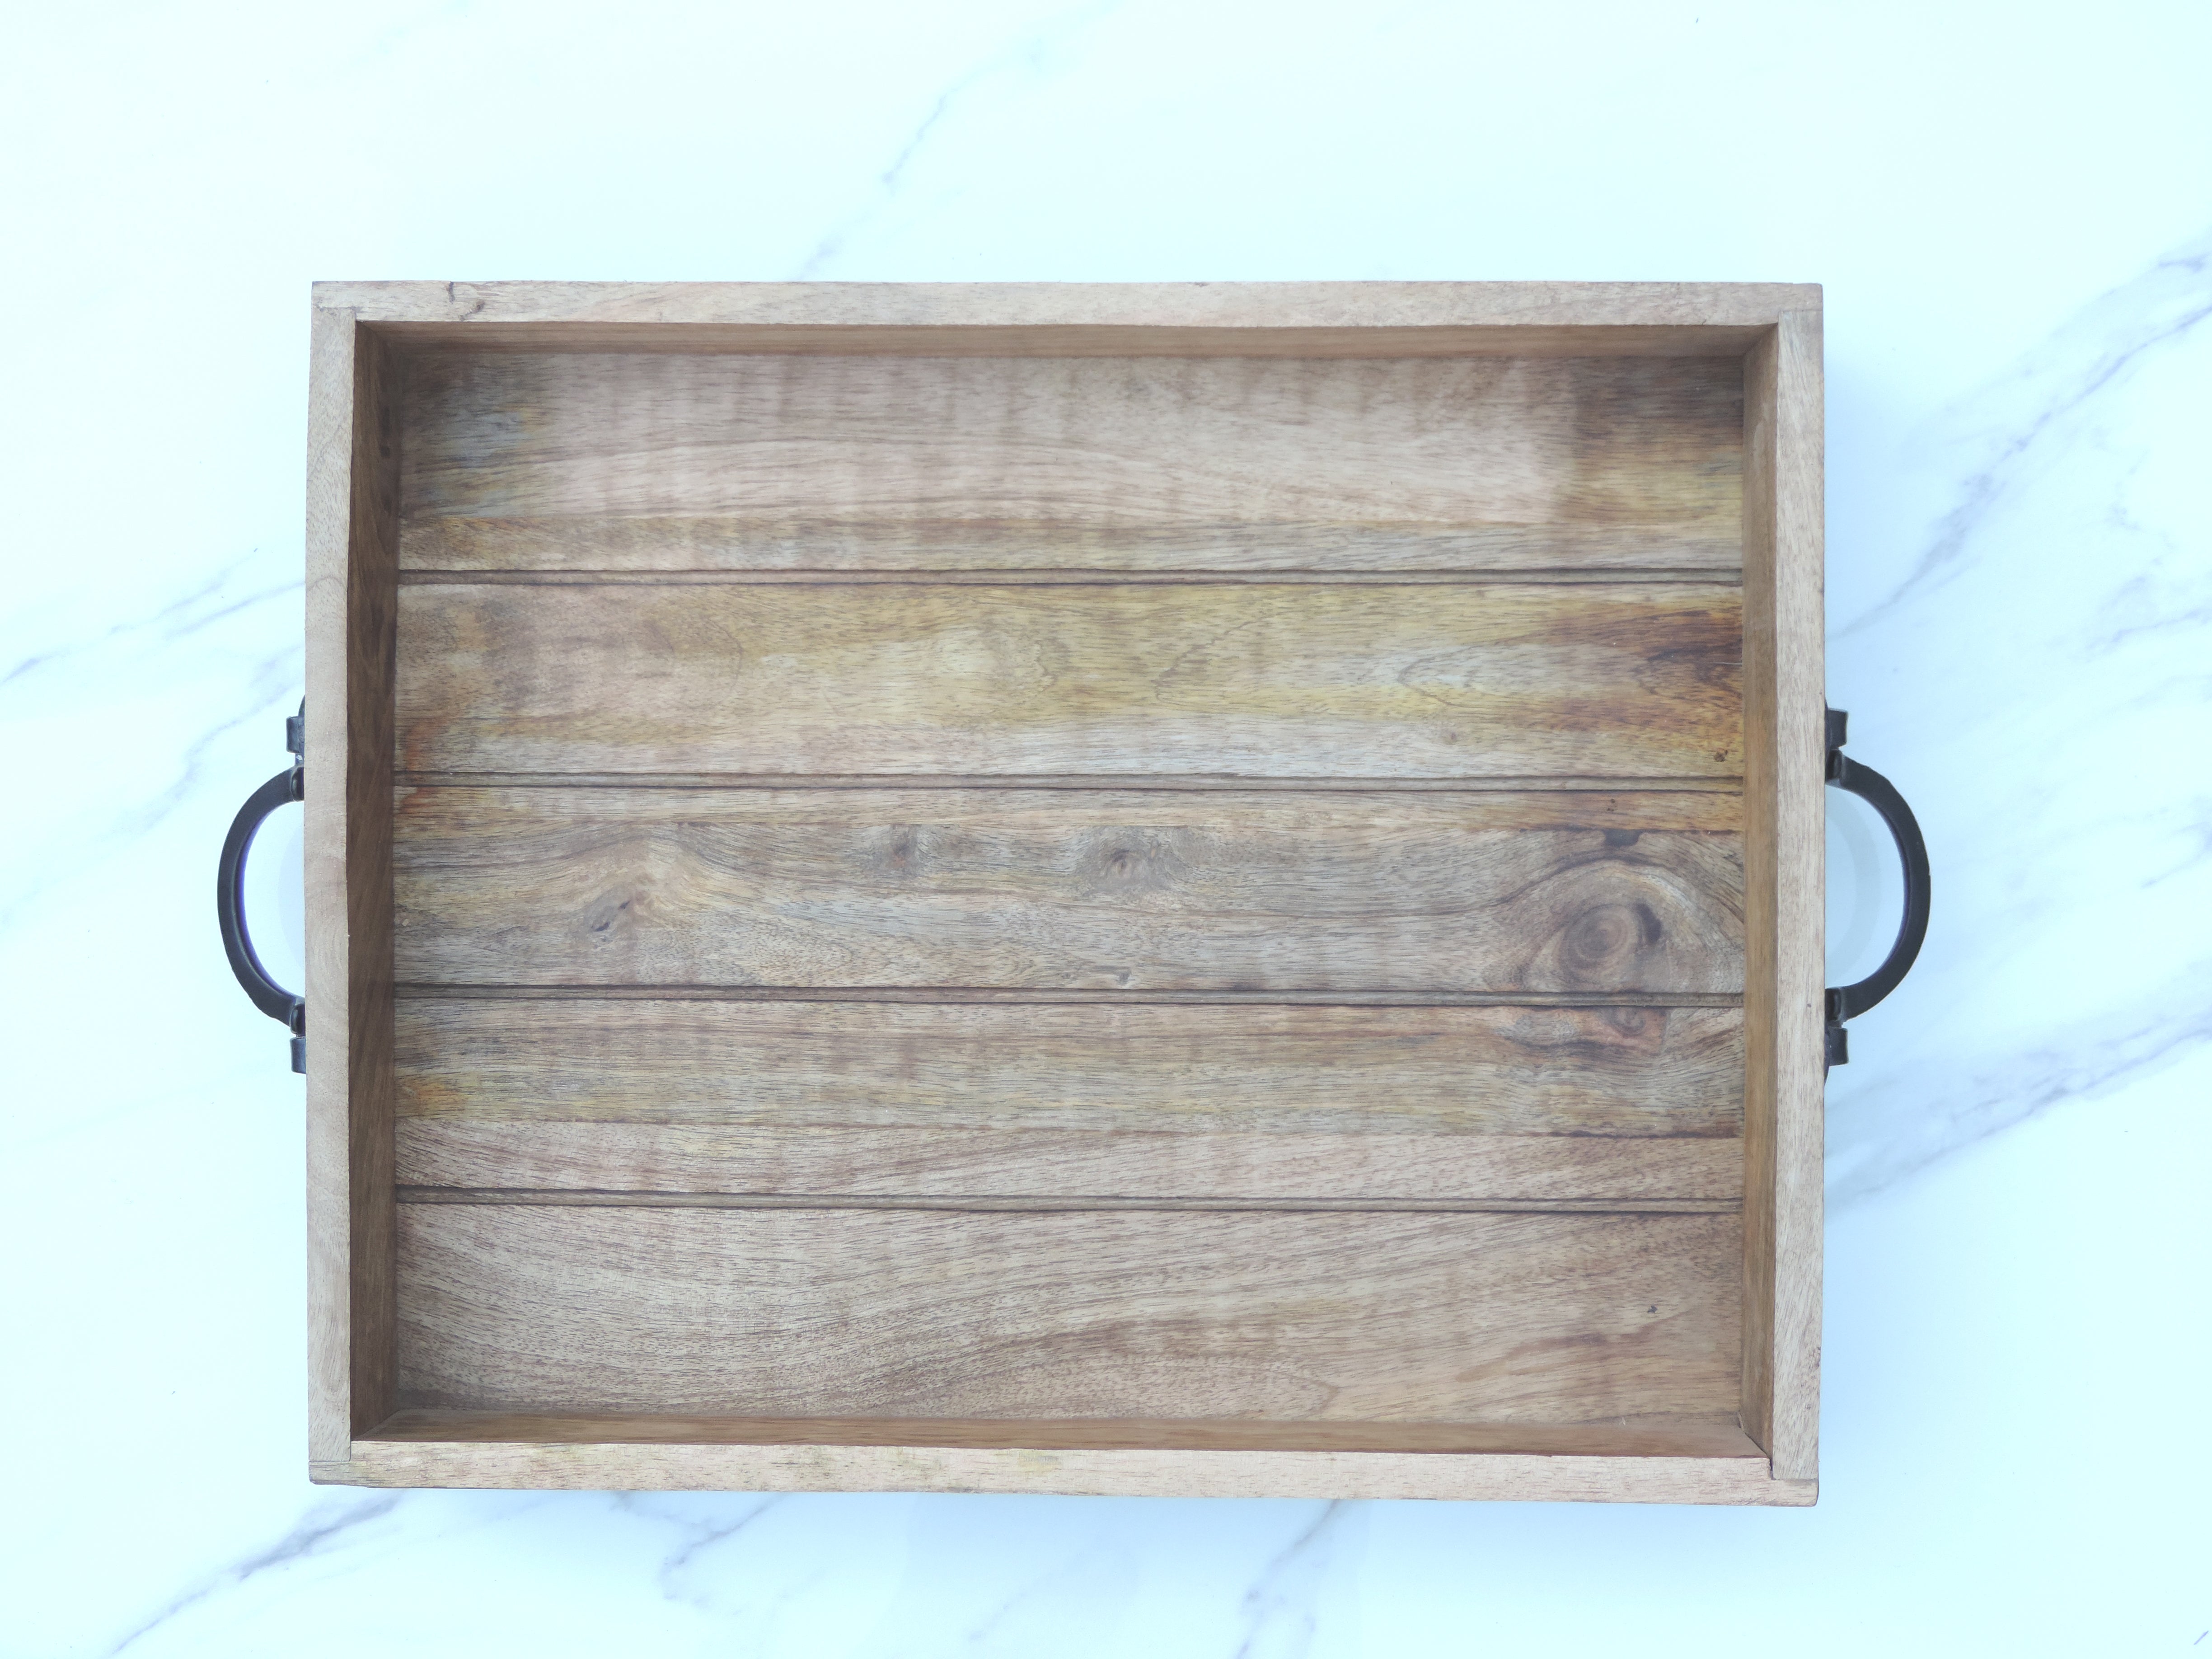 Natural Wooden Serving Trays / 44 * 36 * 2 cm